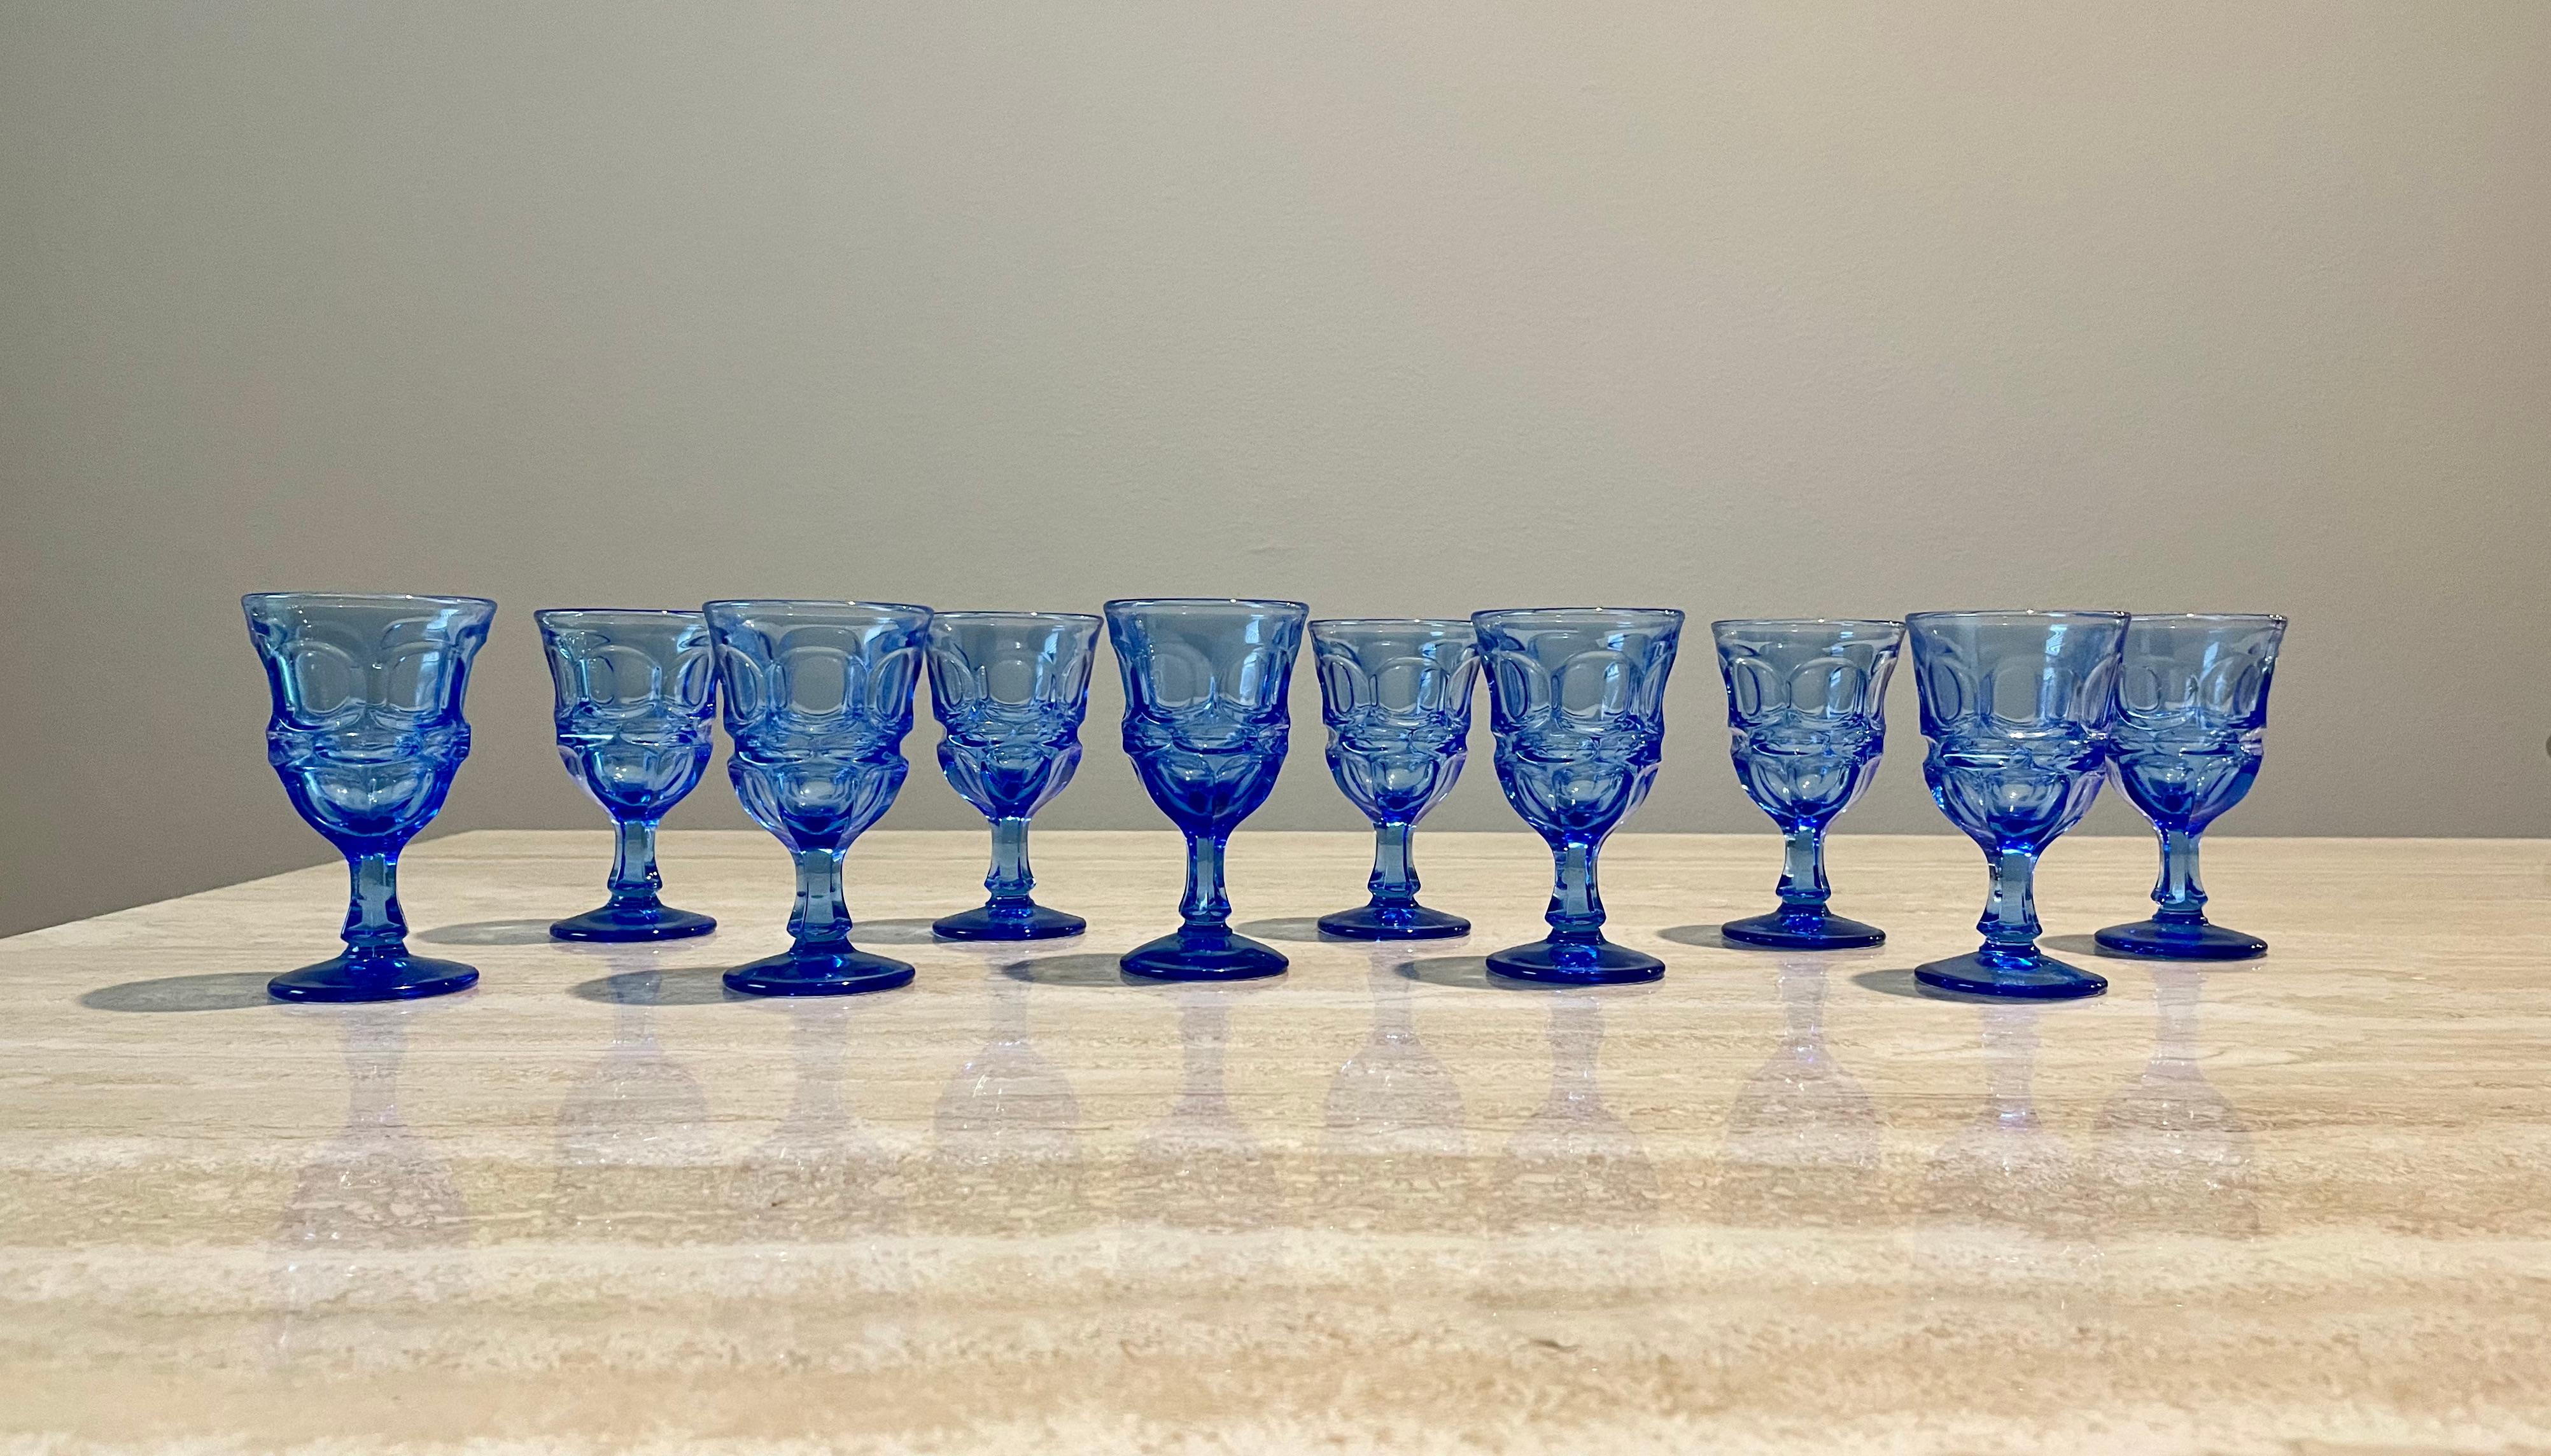 Set of 10 Blue Fostoria Cordial glasses. Great decorative and functional shot glasses for a home bar.